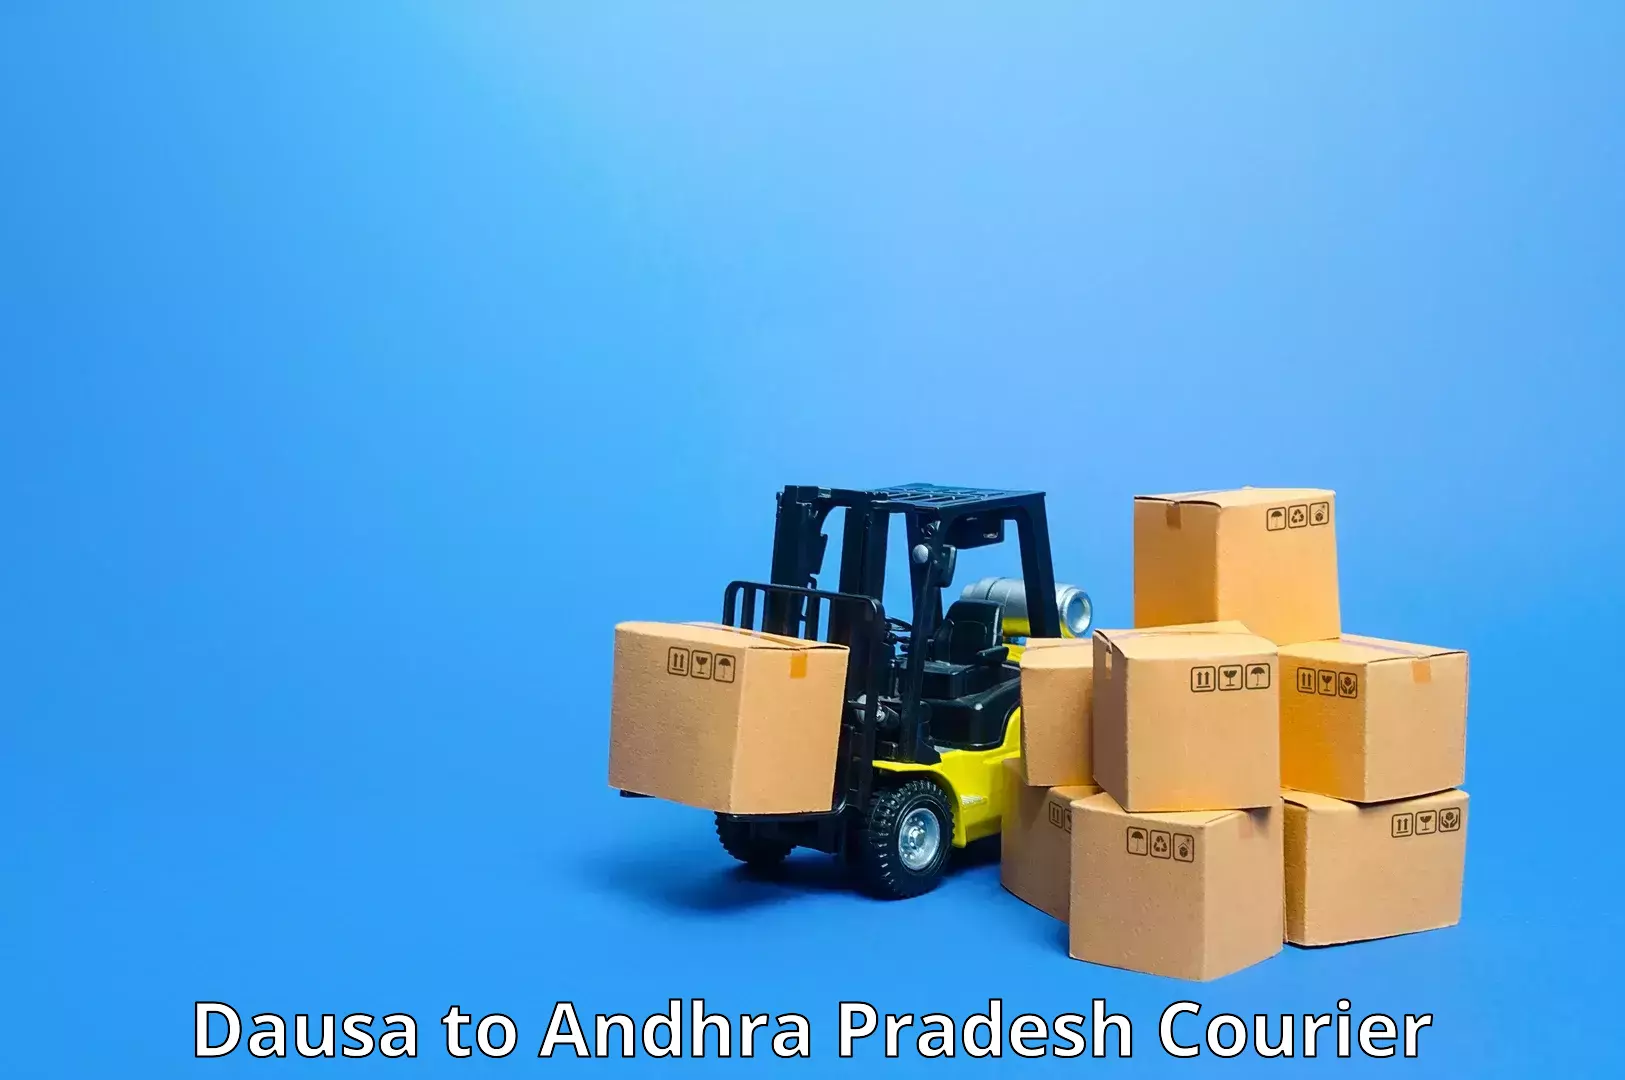 User-friendly delivery service Dausa to Andhra Pradesh